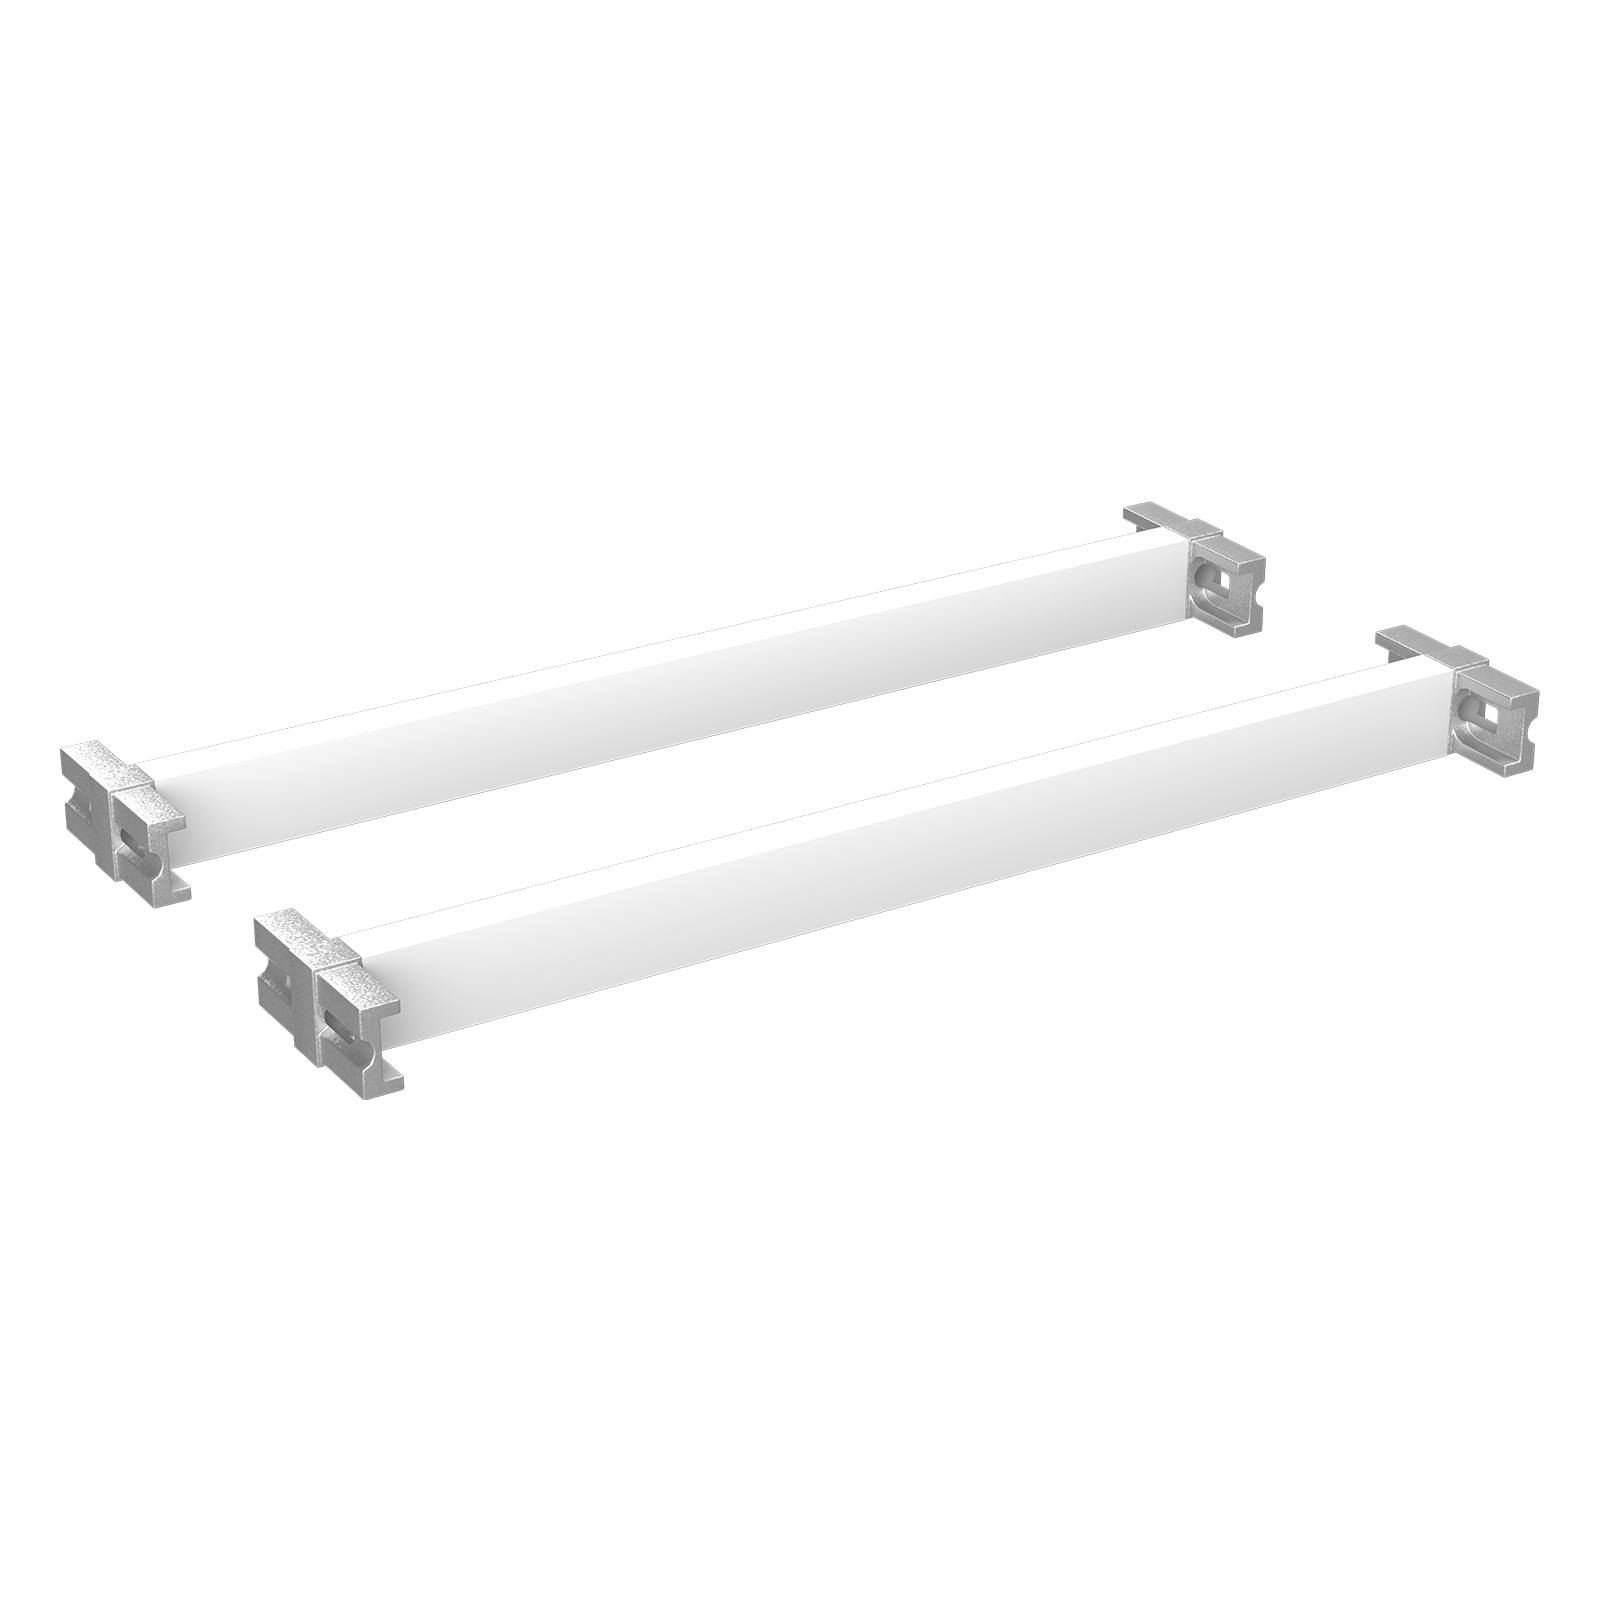 Home Solutions 435mm Cross Bars & T-Connector White